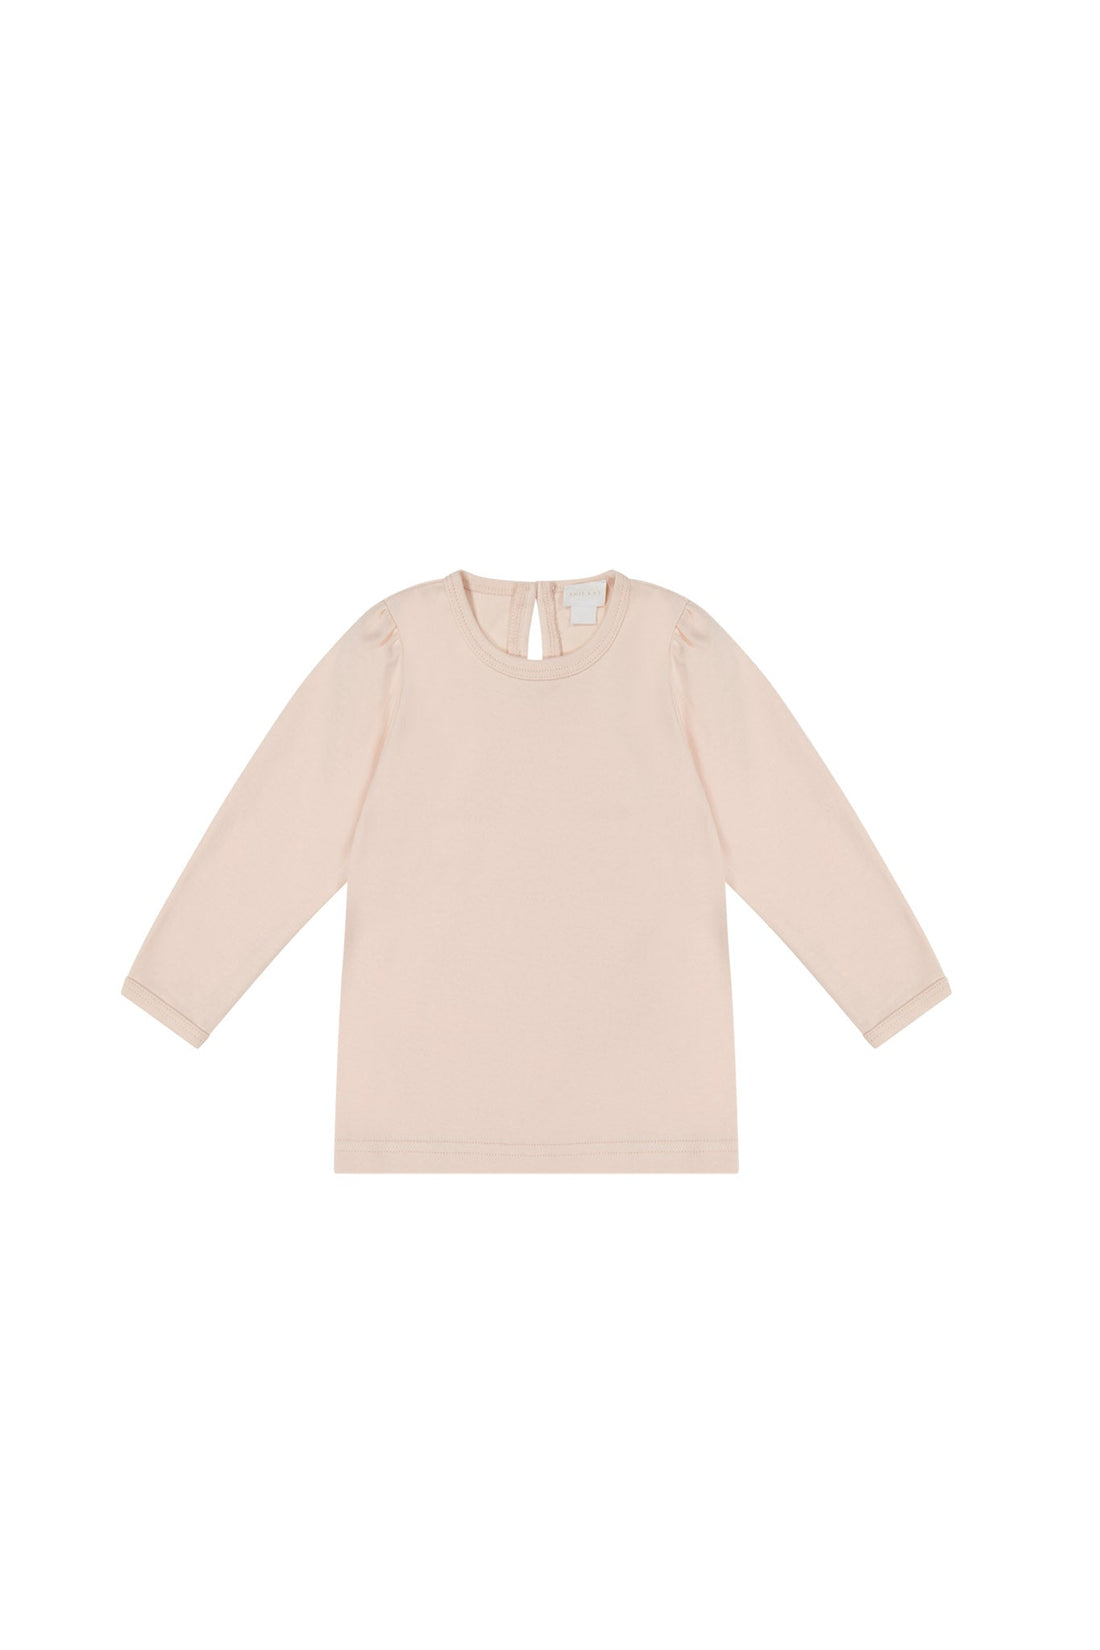 Pima Cotton Cindy Top - Boto Pink Childrens Top from Jamie Kay USA